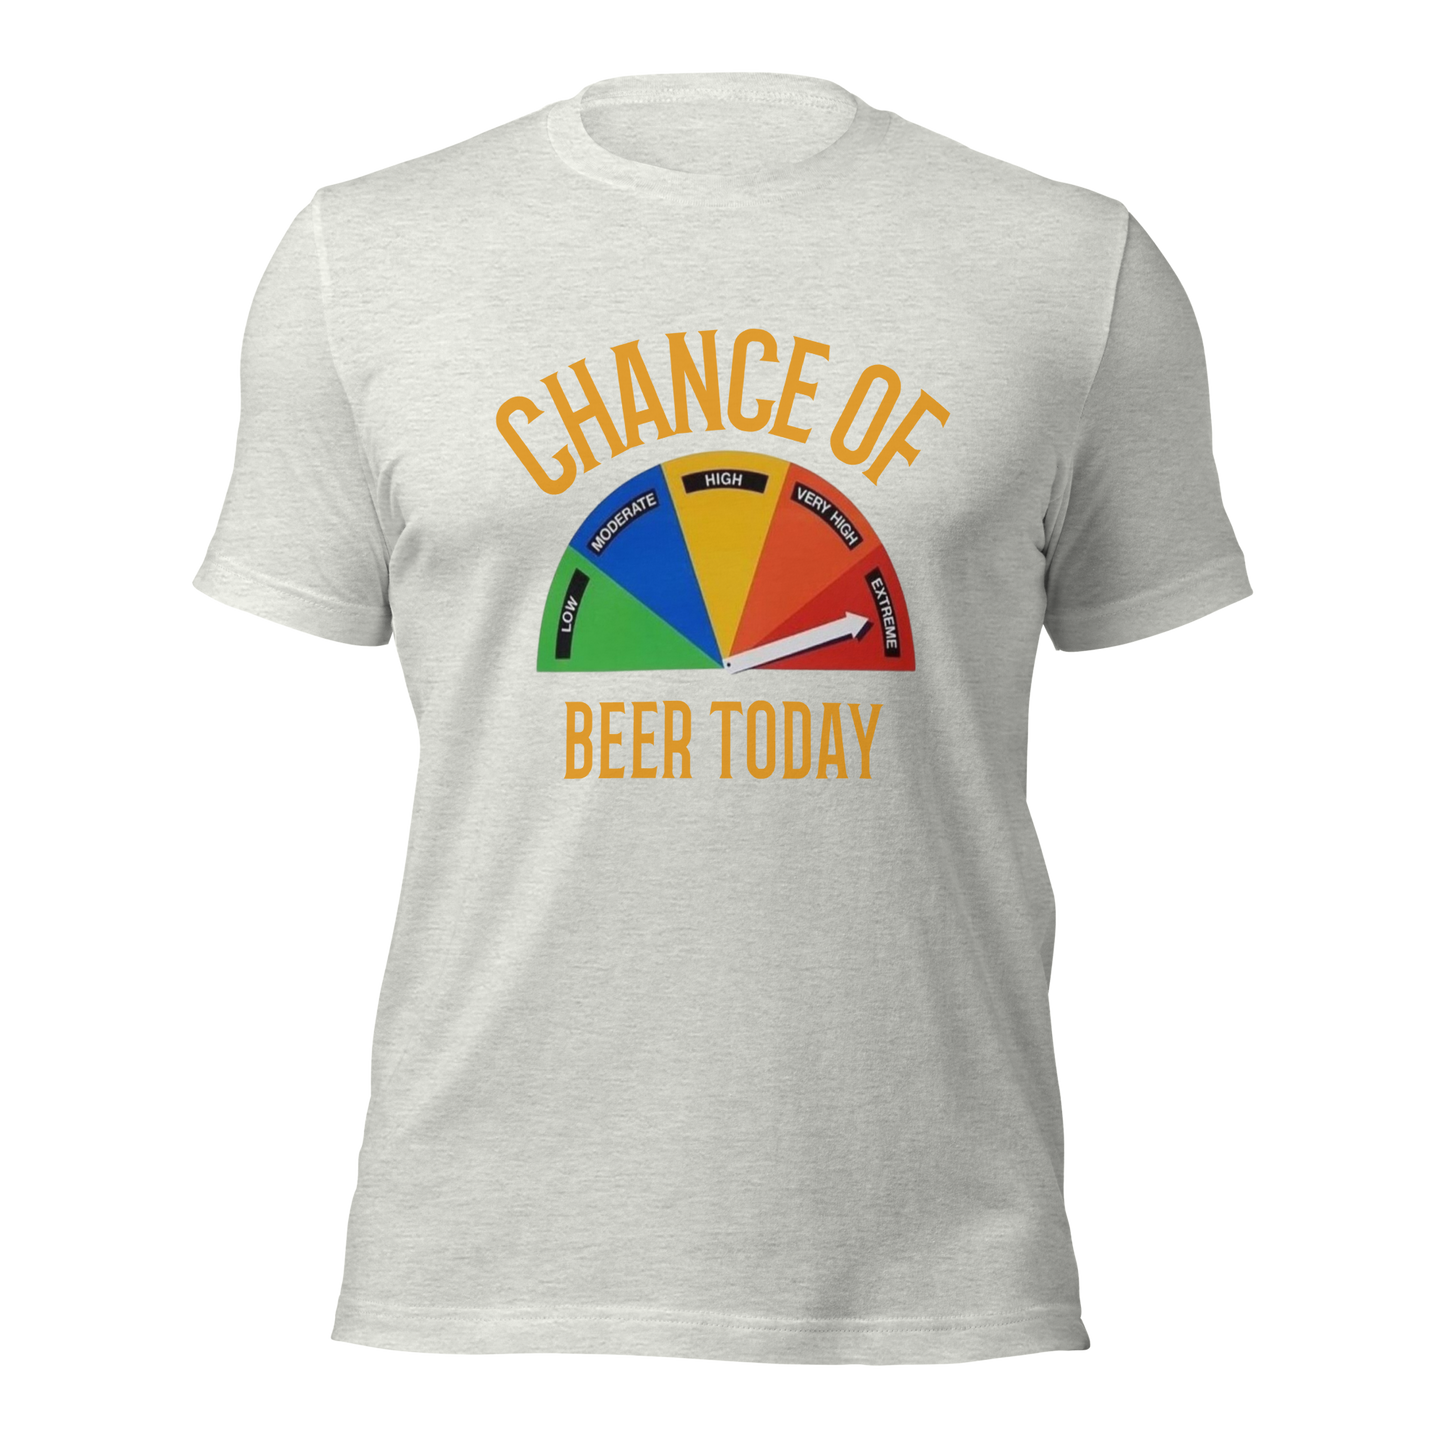 Chance of Beer Unisex t-shirt